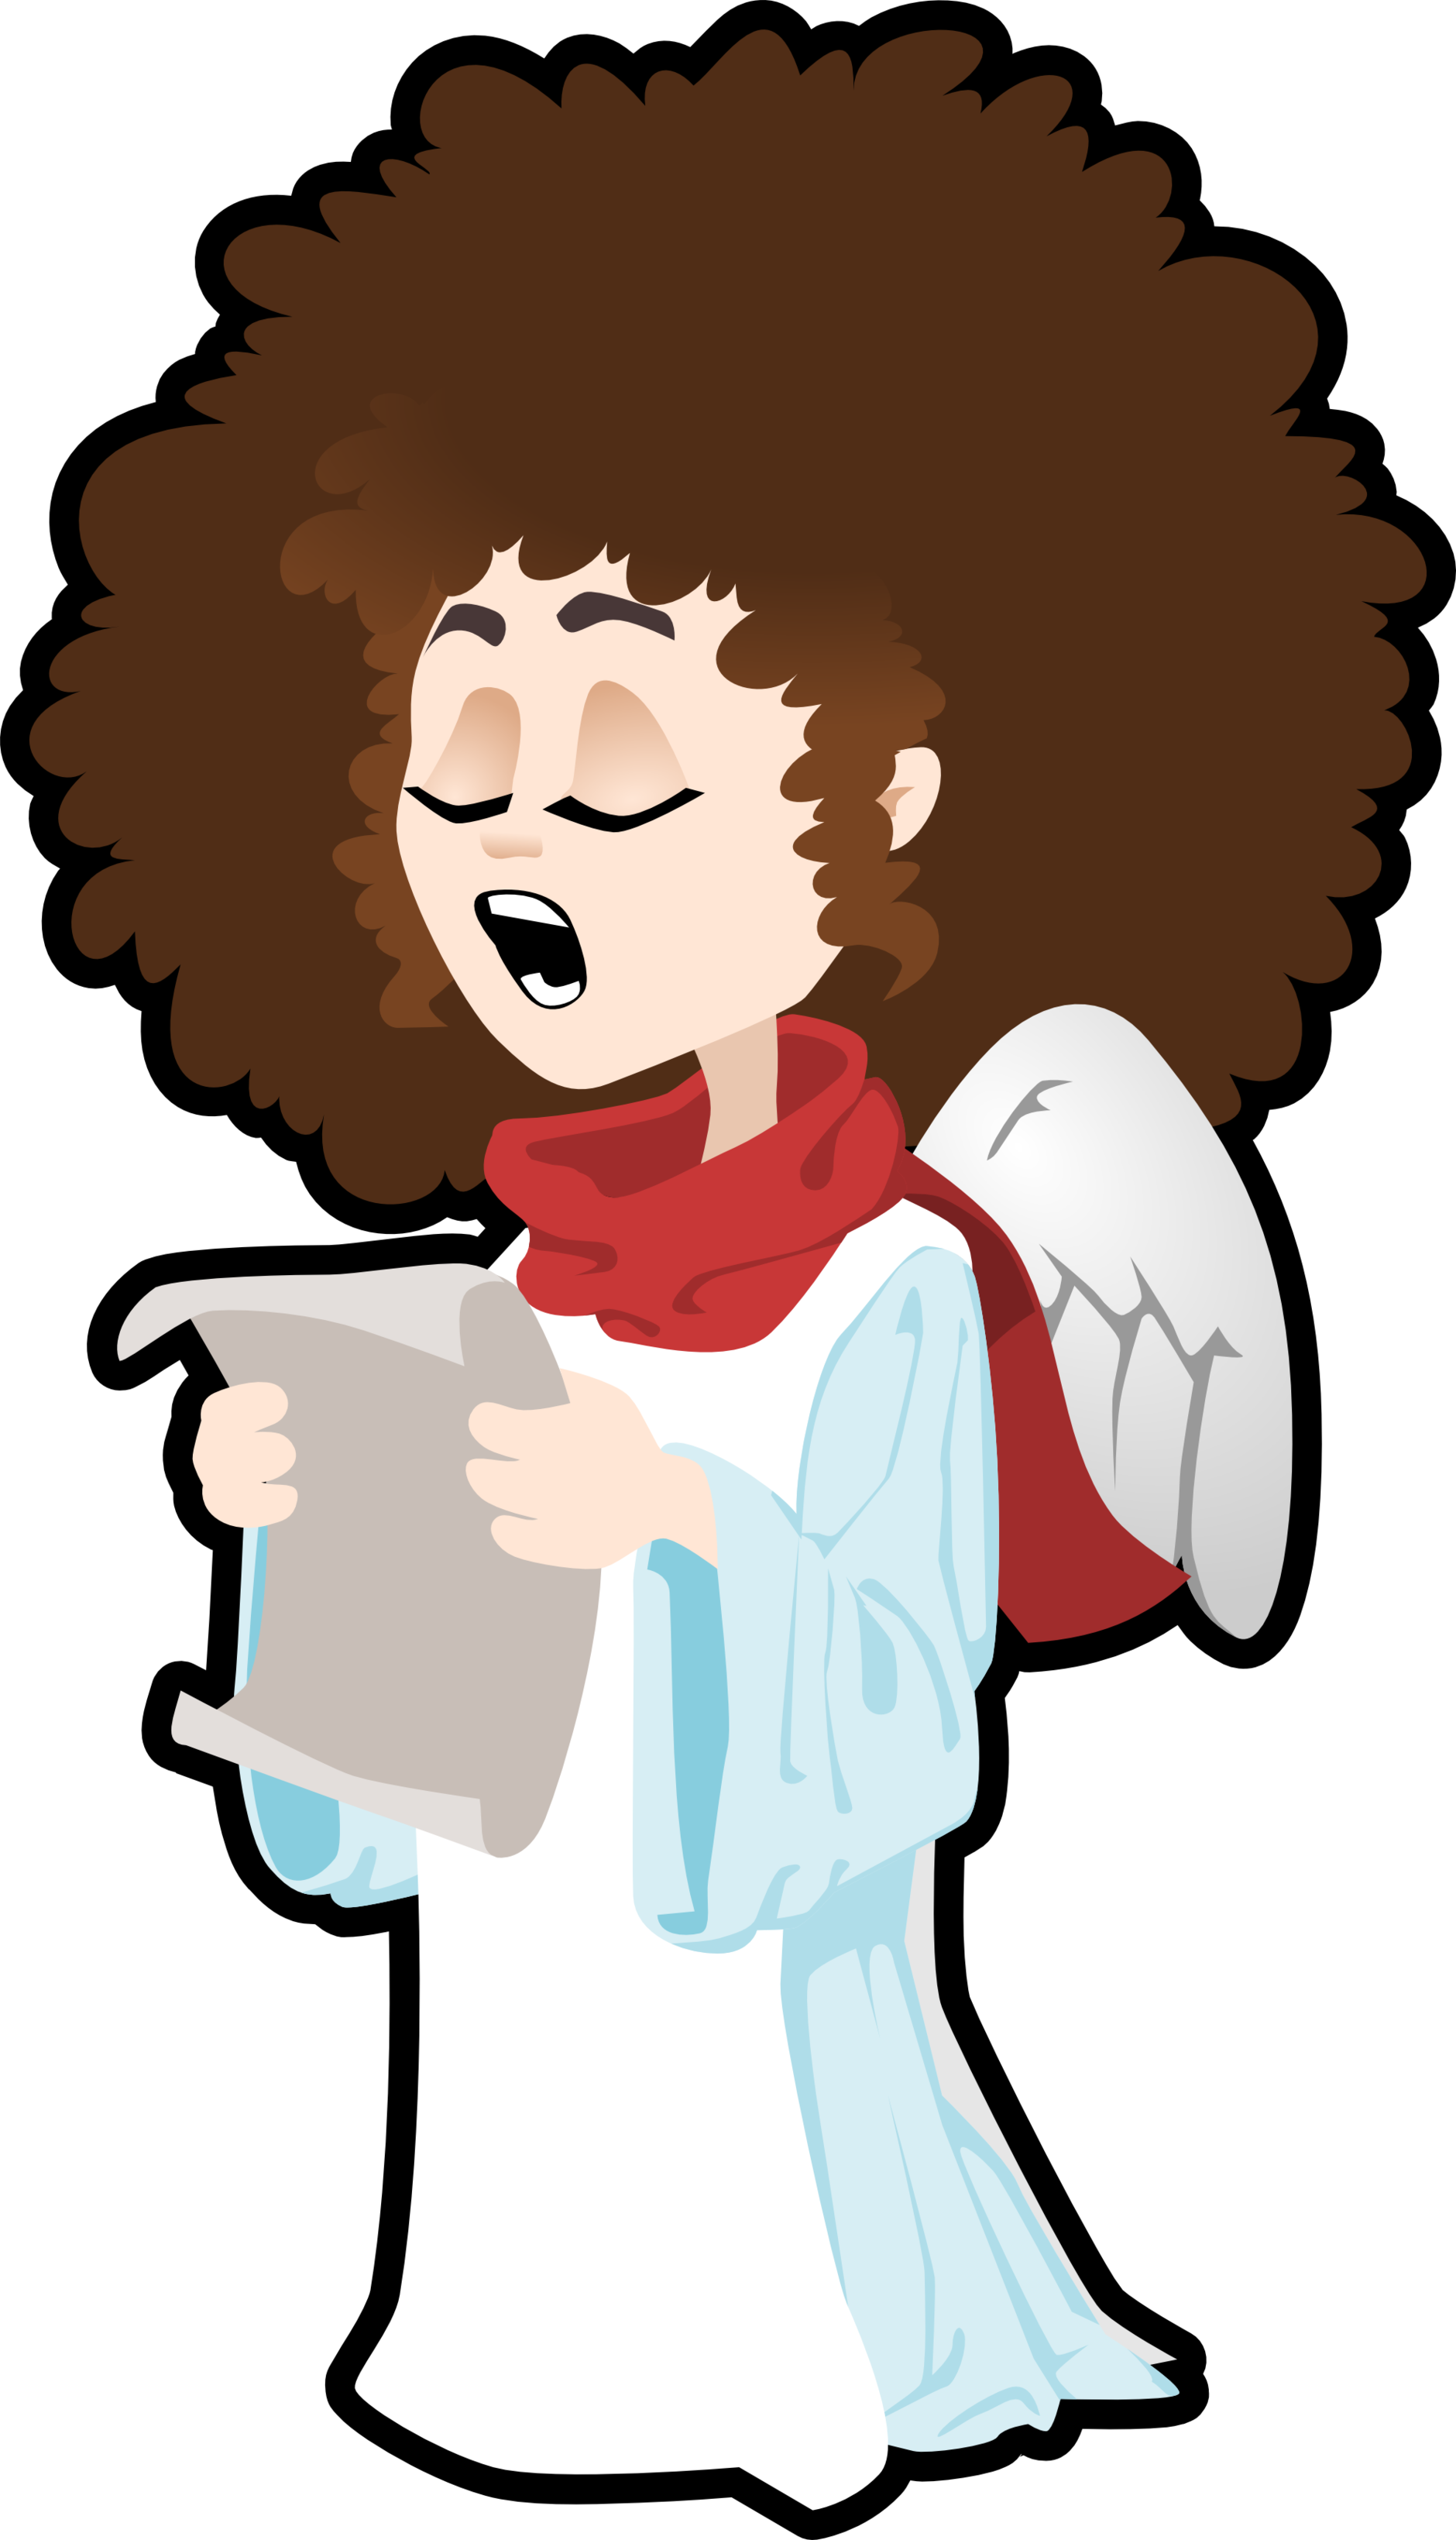 African American Angels Clip Art Clipart - Free to use Clip Art ...